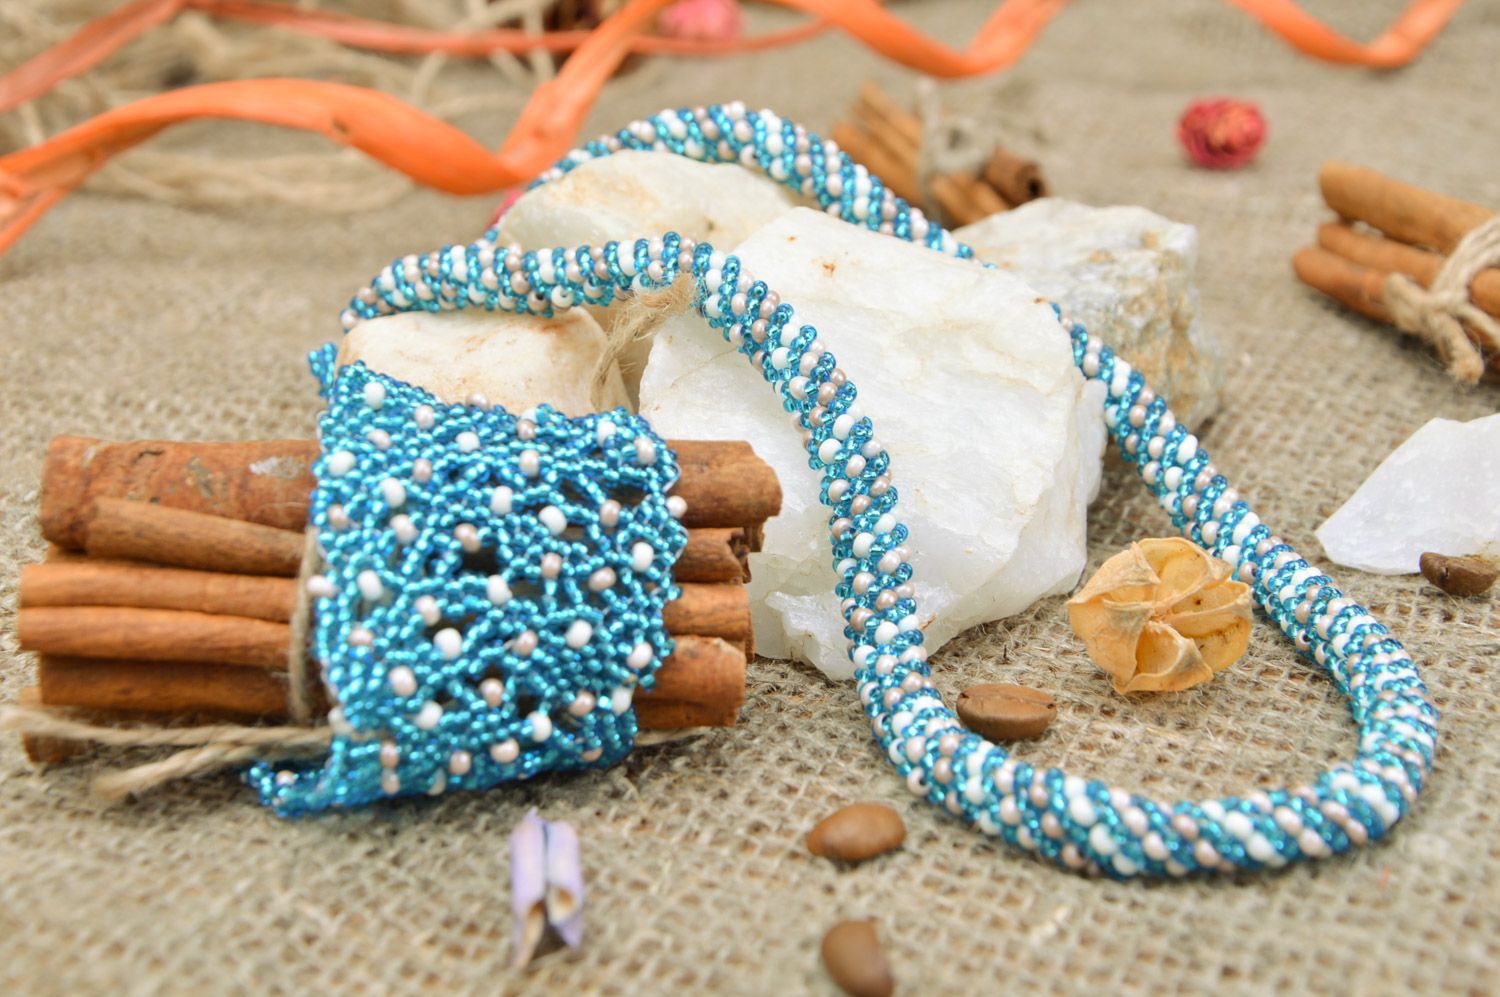 Handmade beaded jewelry set 2 items necklace and wrist bracelet in blue color photo 1